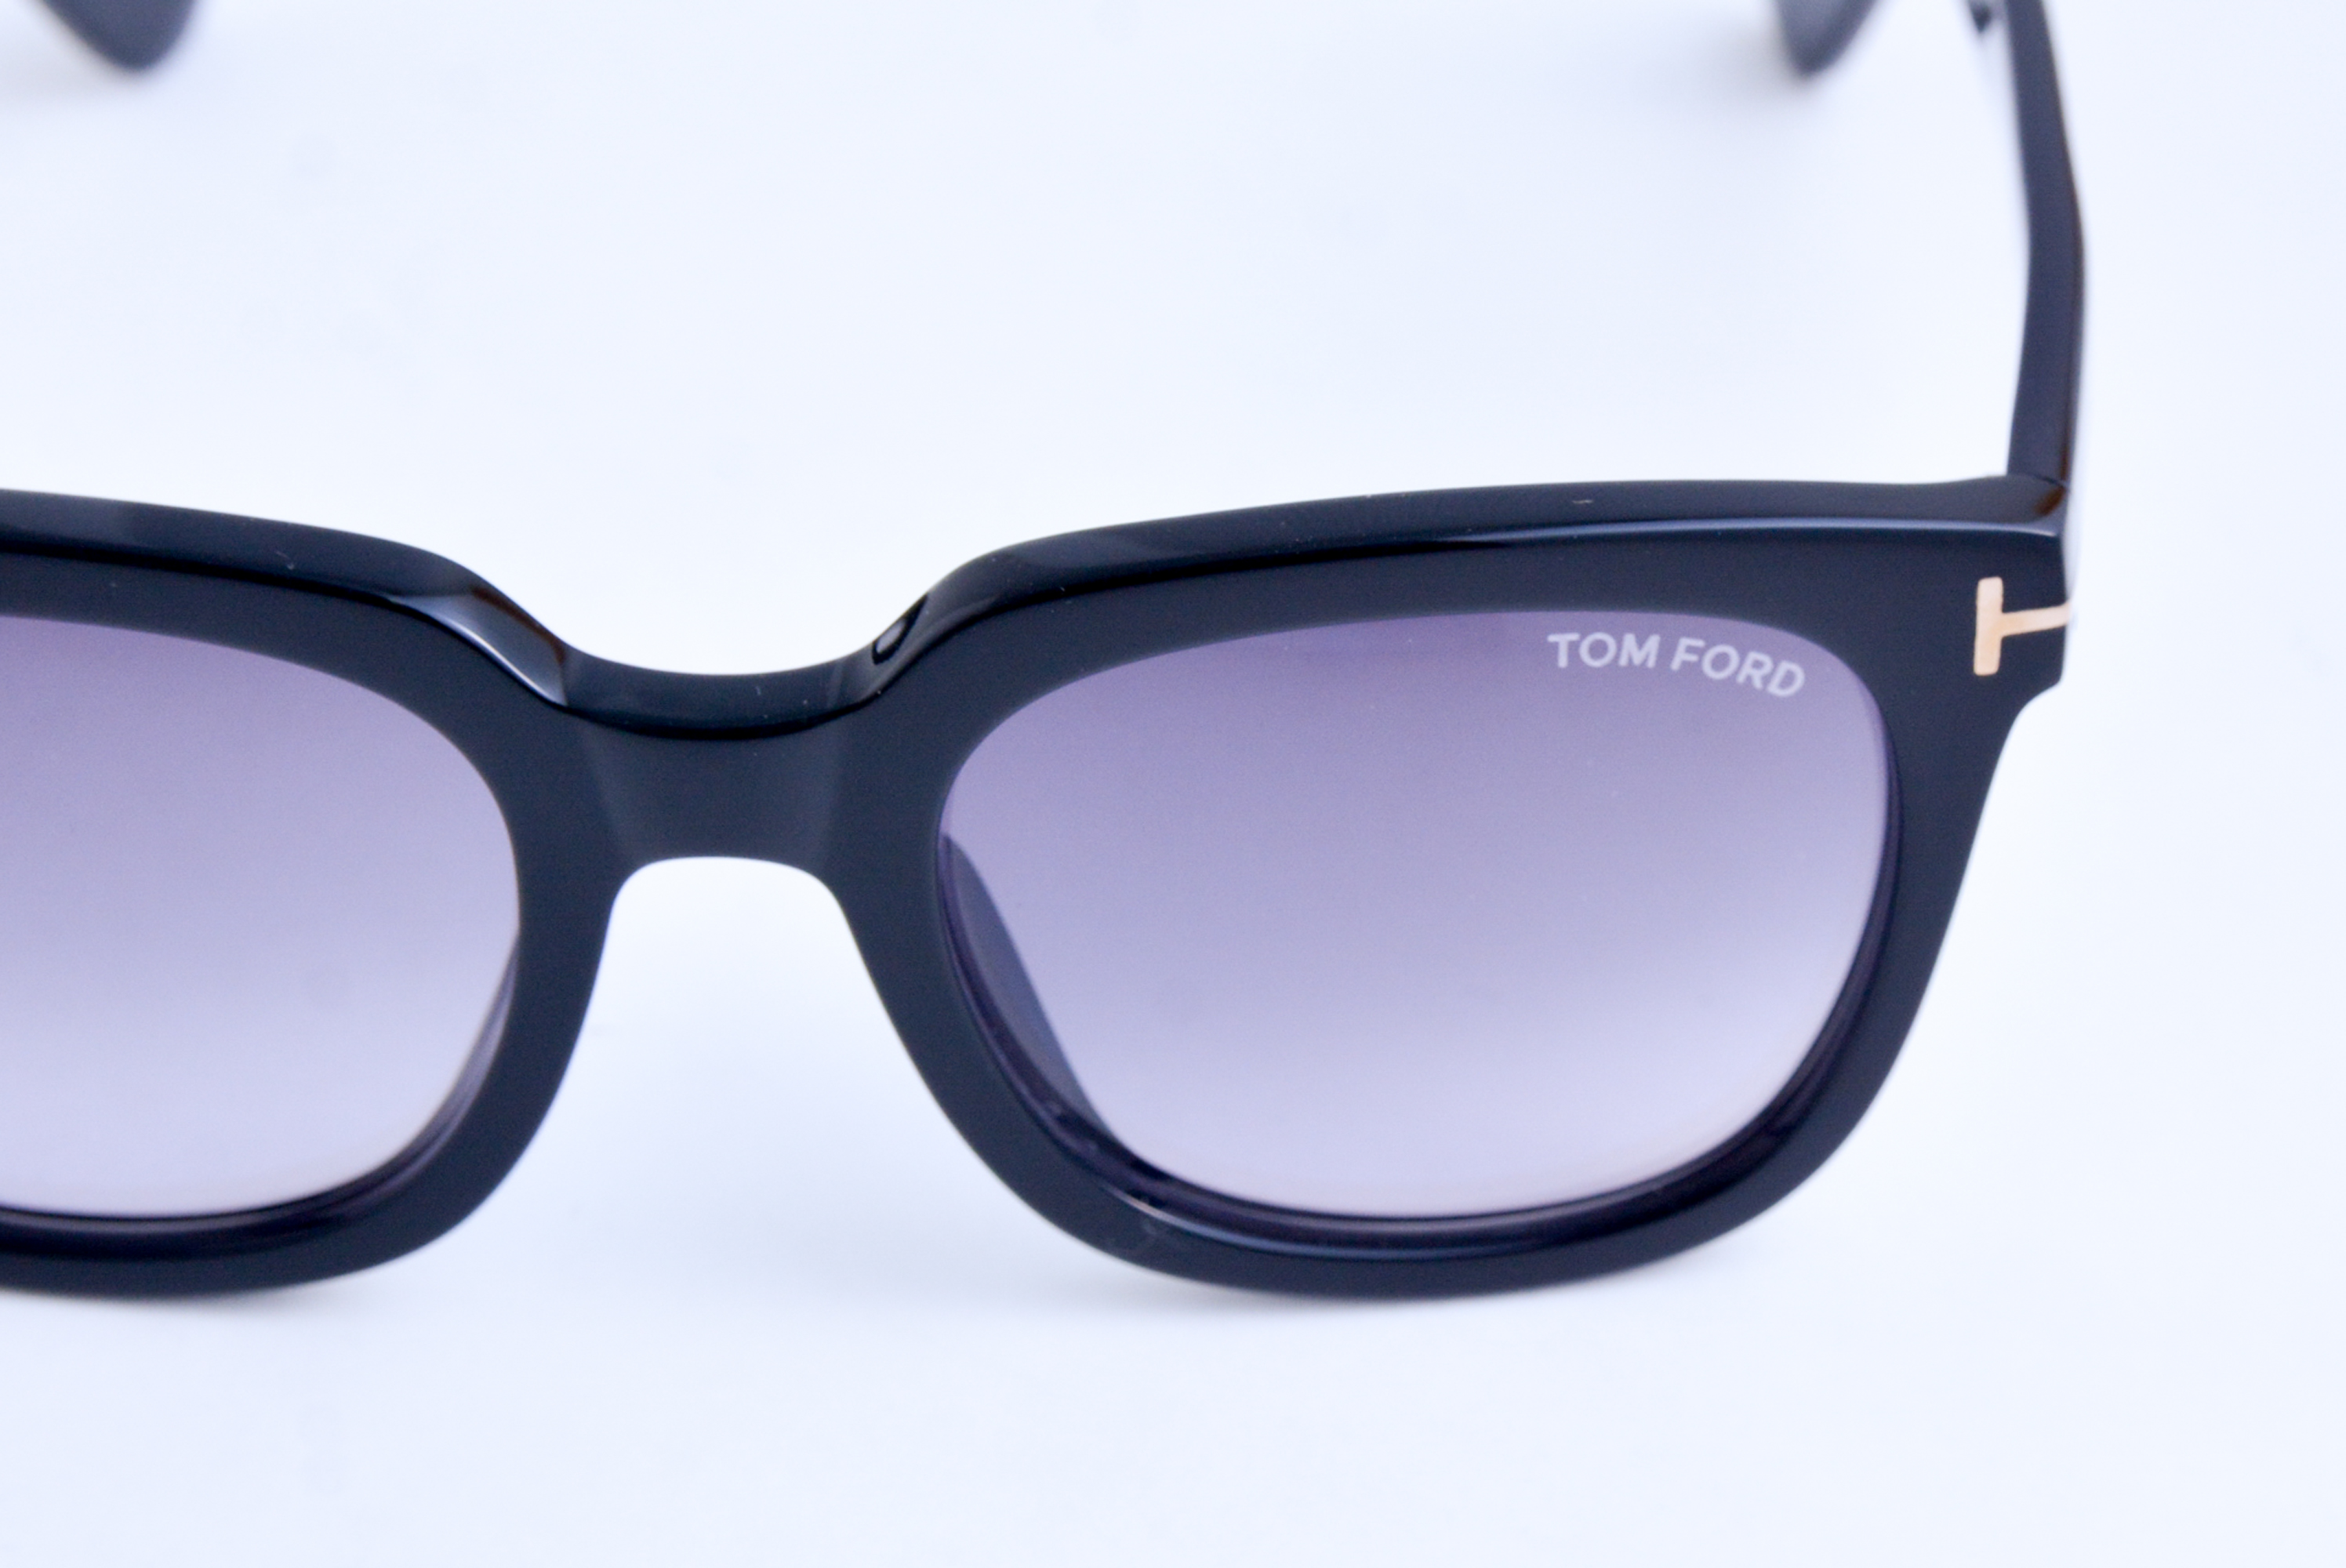 Style completed with sunglasses #2｜＜TOM FORD/トムフォード＞新作モデル多数登場！レトロムードの流れ